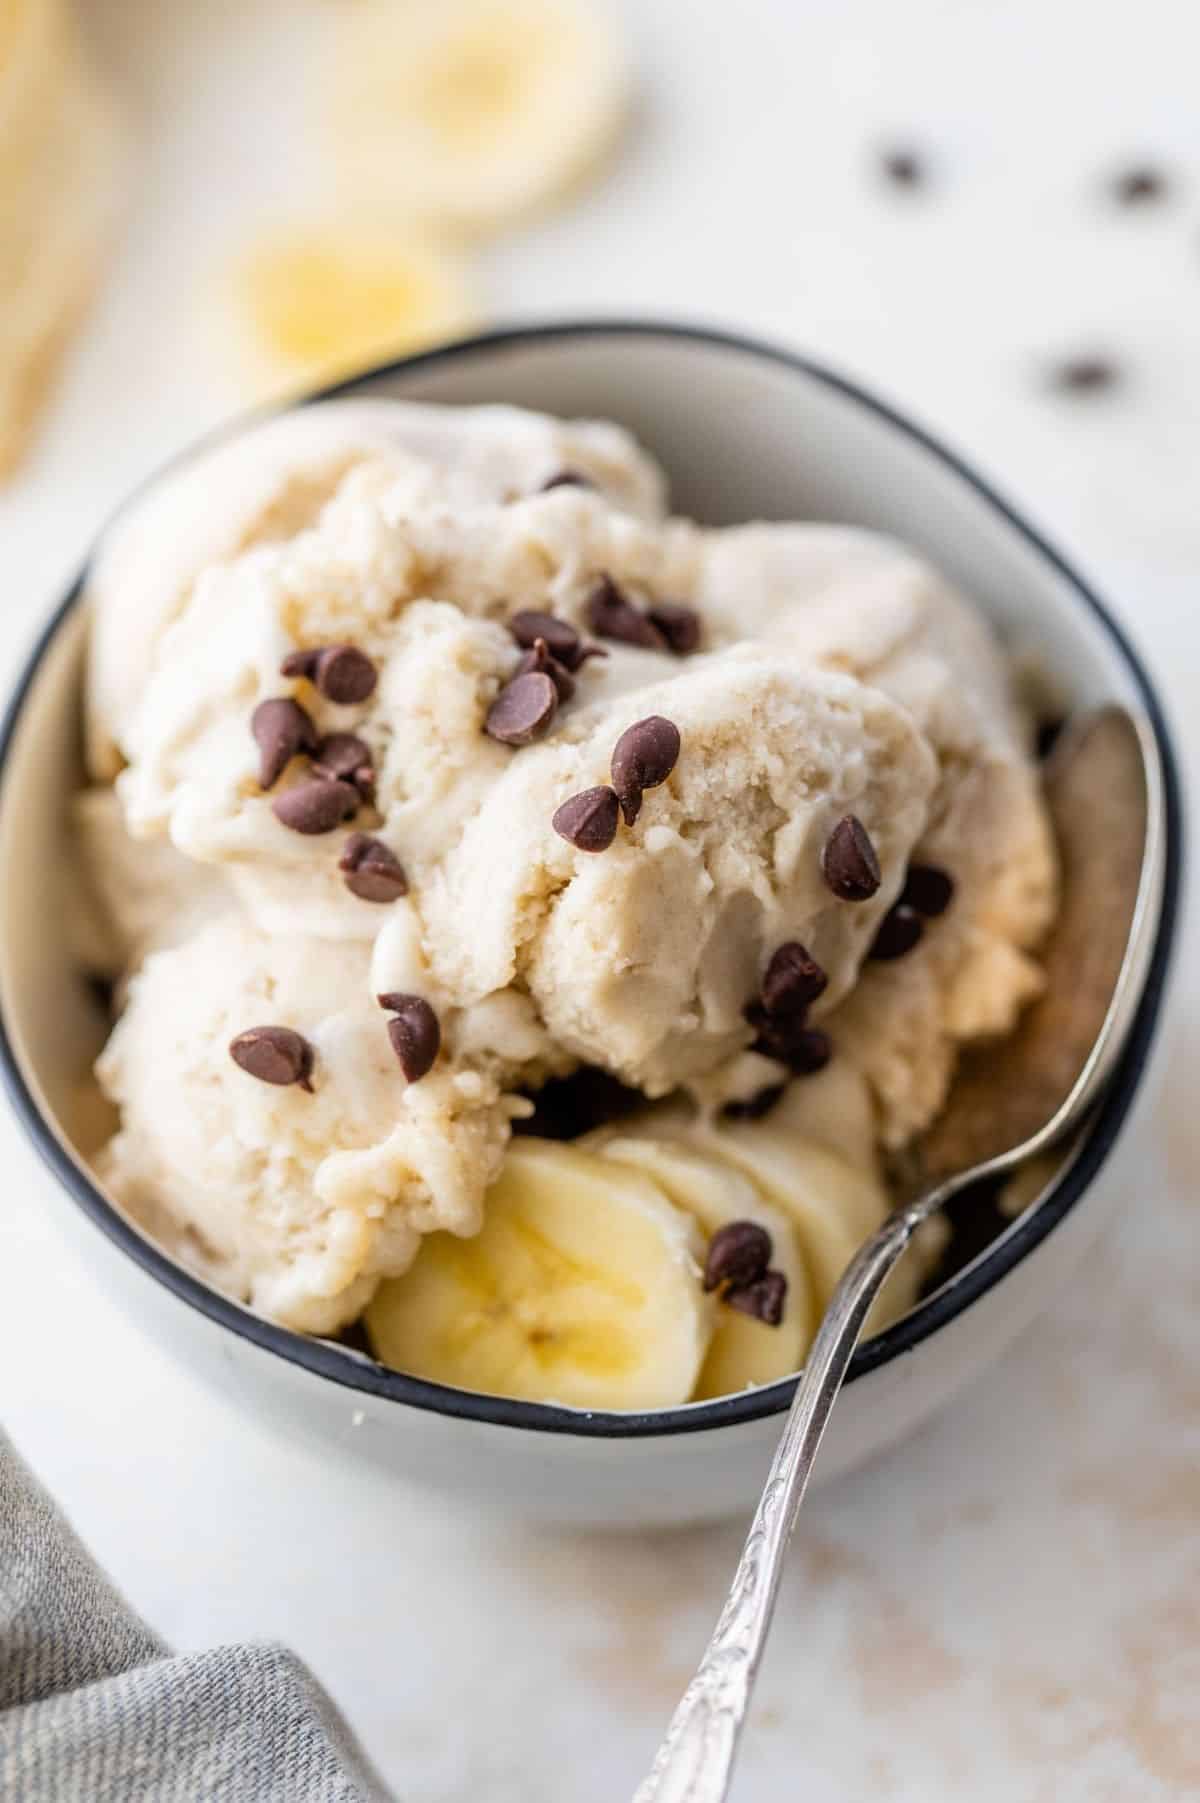 banana ice cream in a bowl topped with chocolate chips